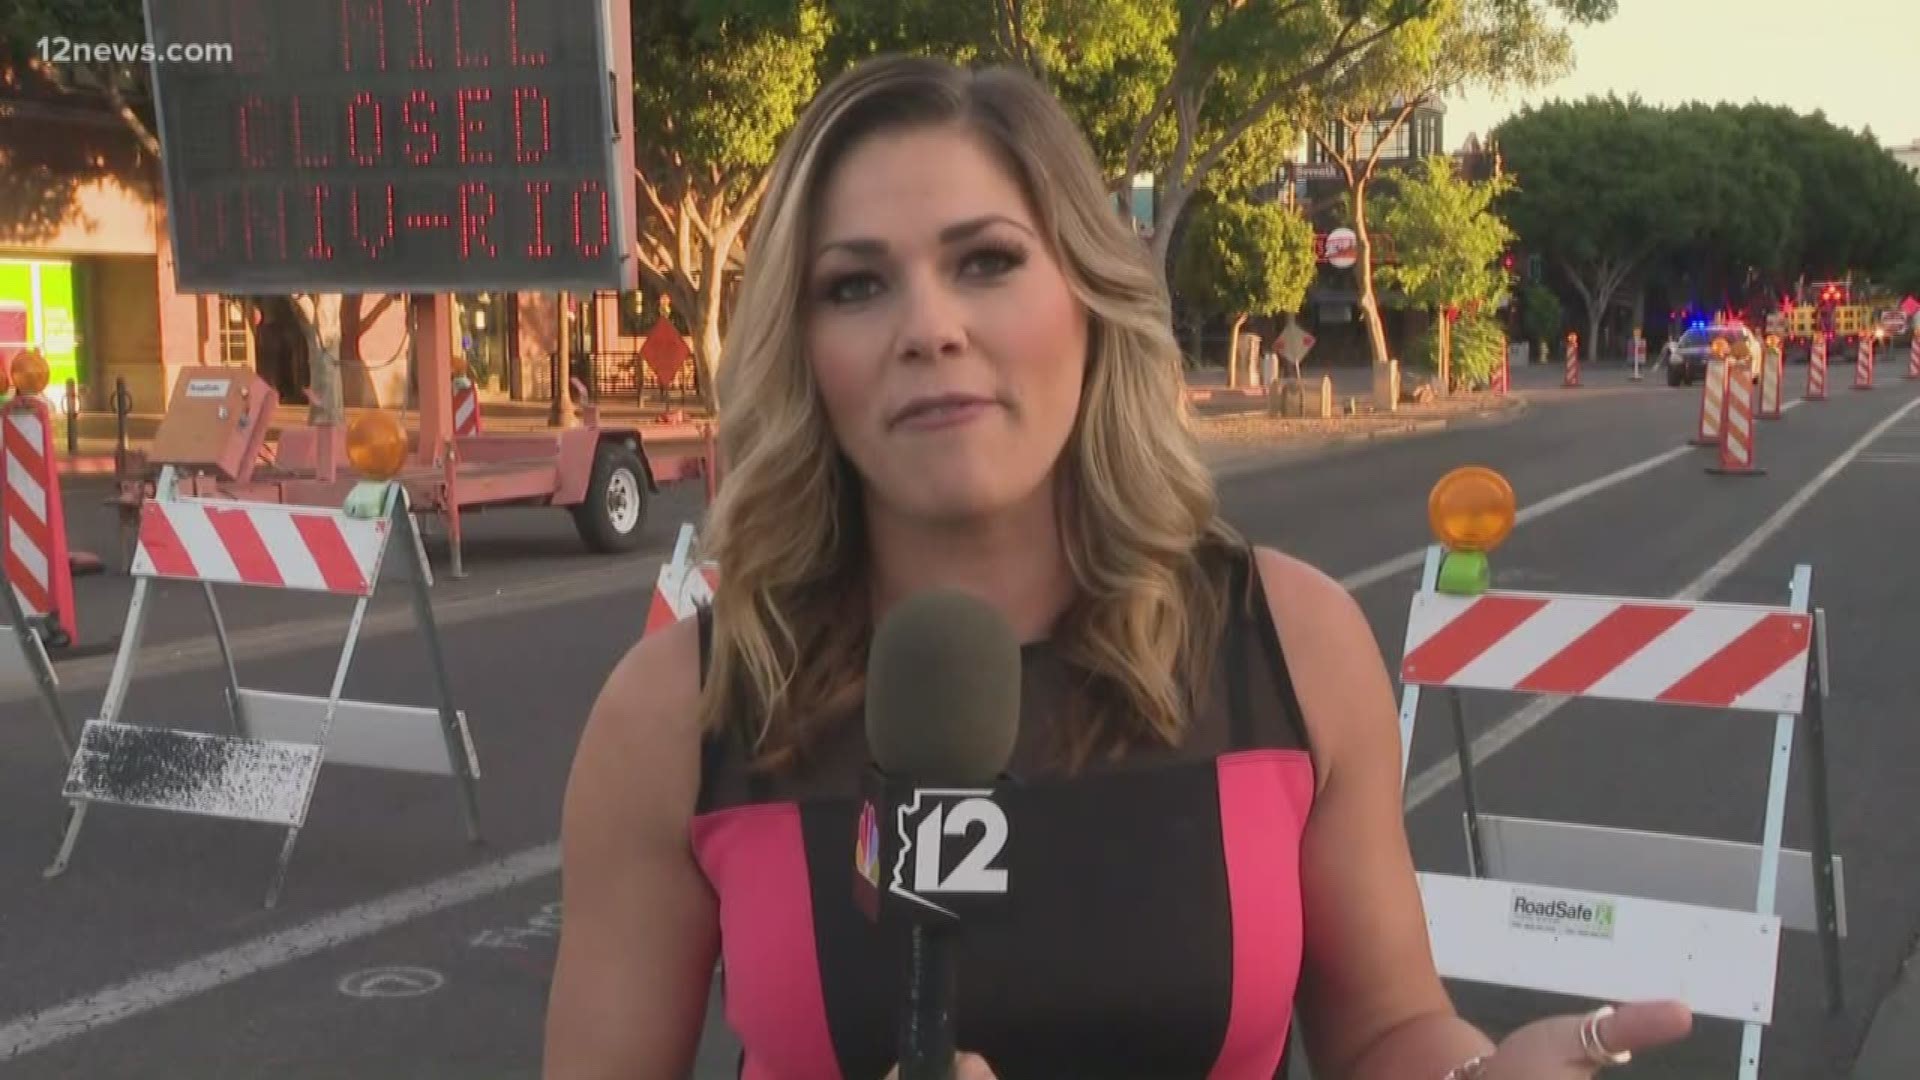 Rachel Cole tells us what traffic delays to expect as construction begins for the streetcar project near Mill Avenue in Tempe.